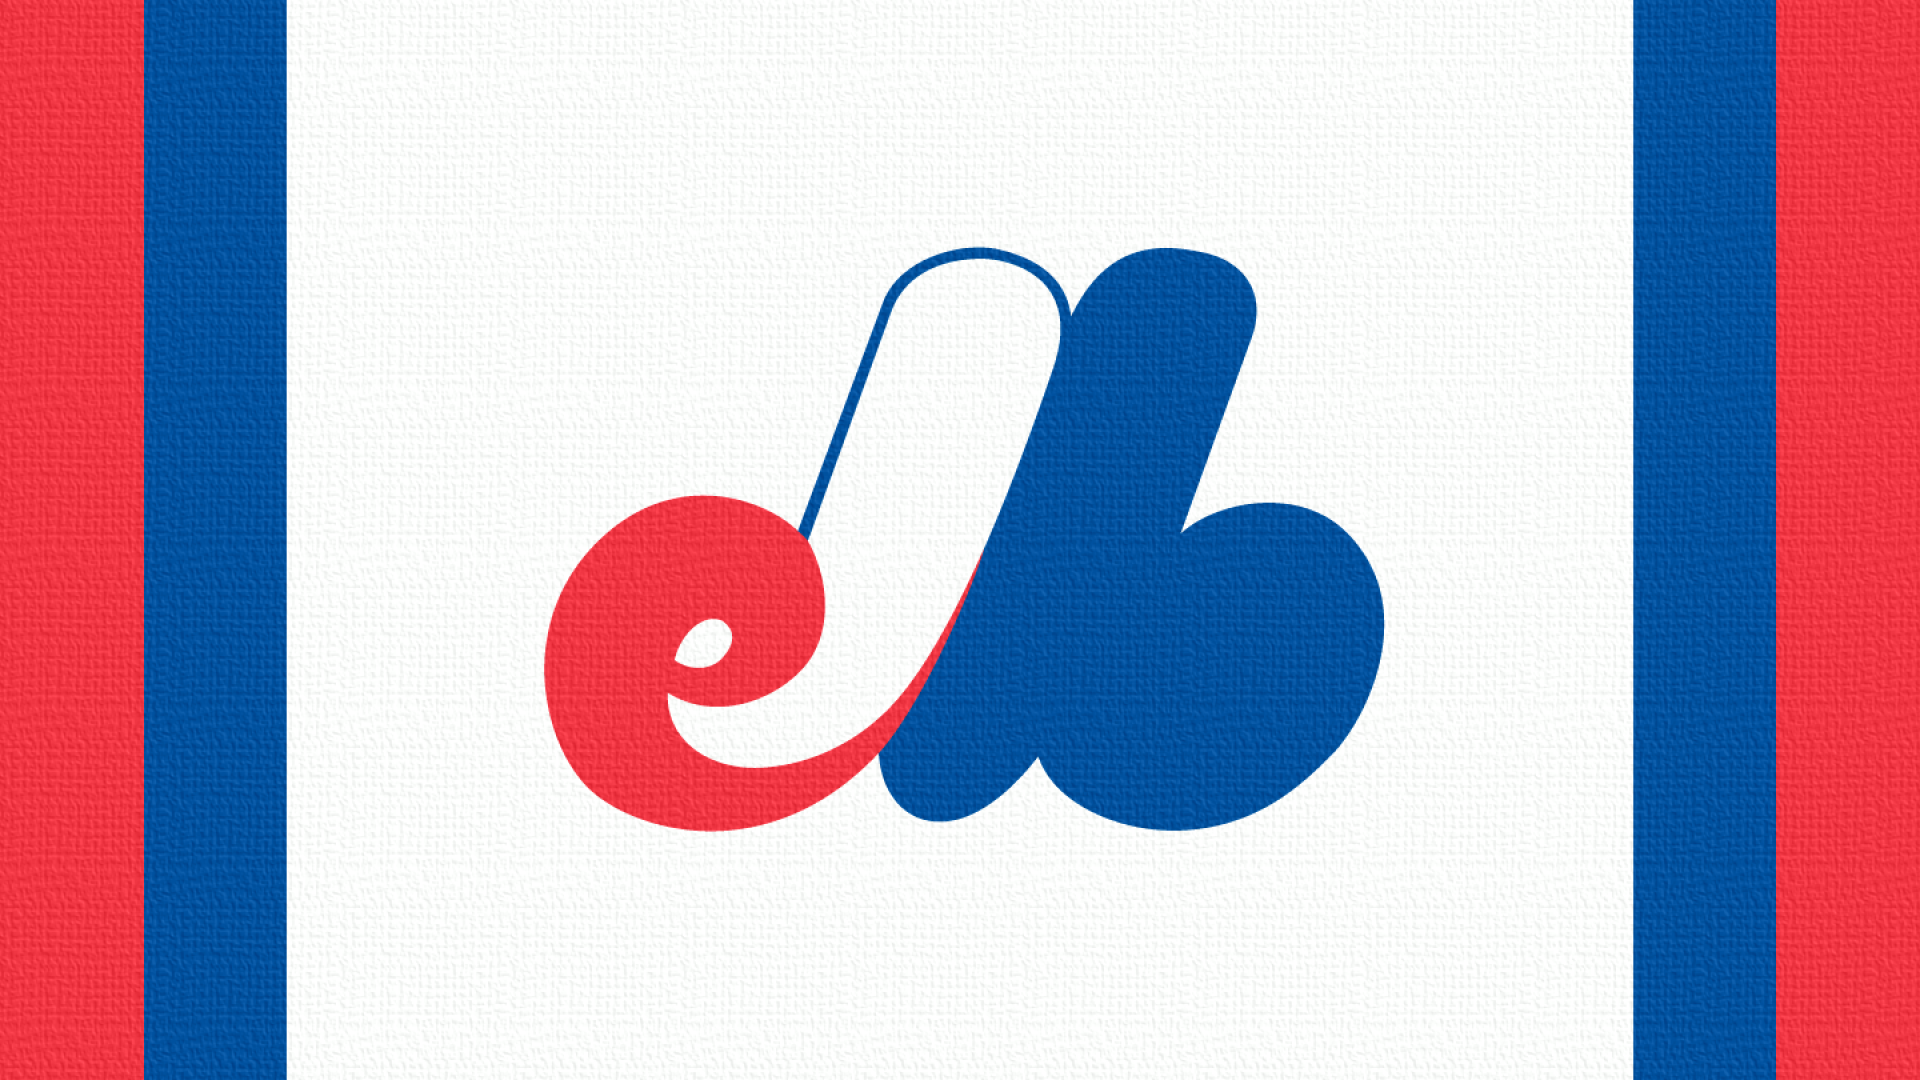 Montreal Expos Wallpapers - Wallpaper Cave